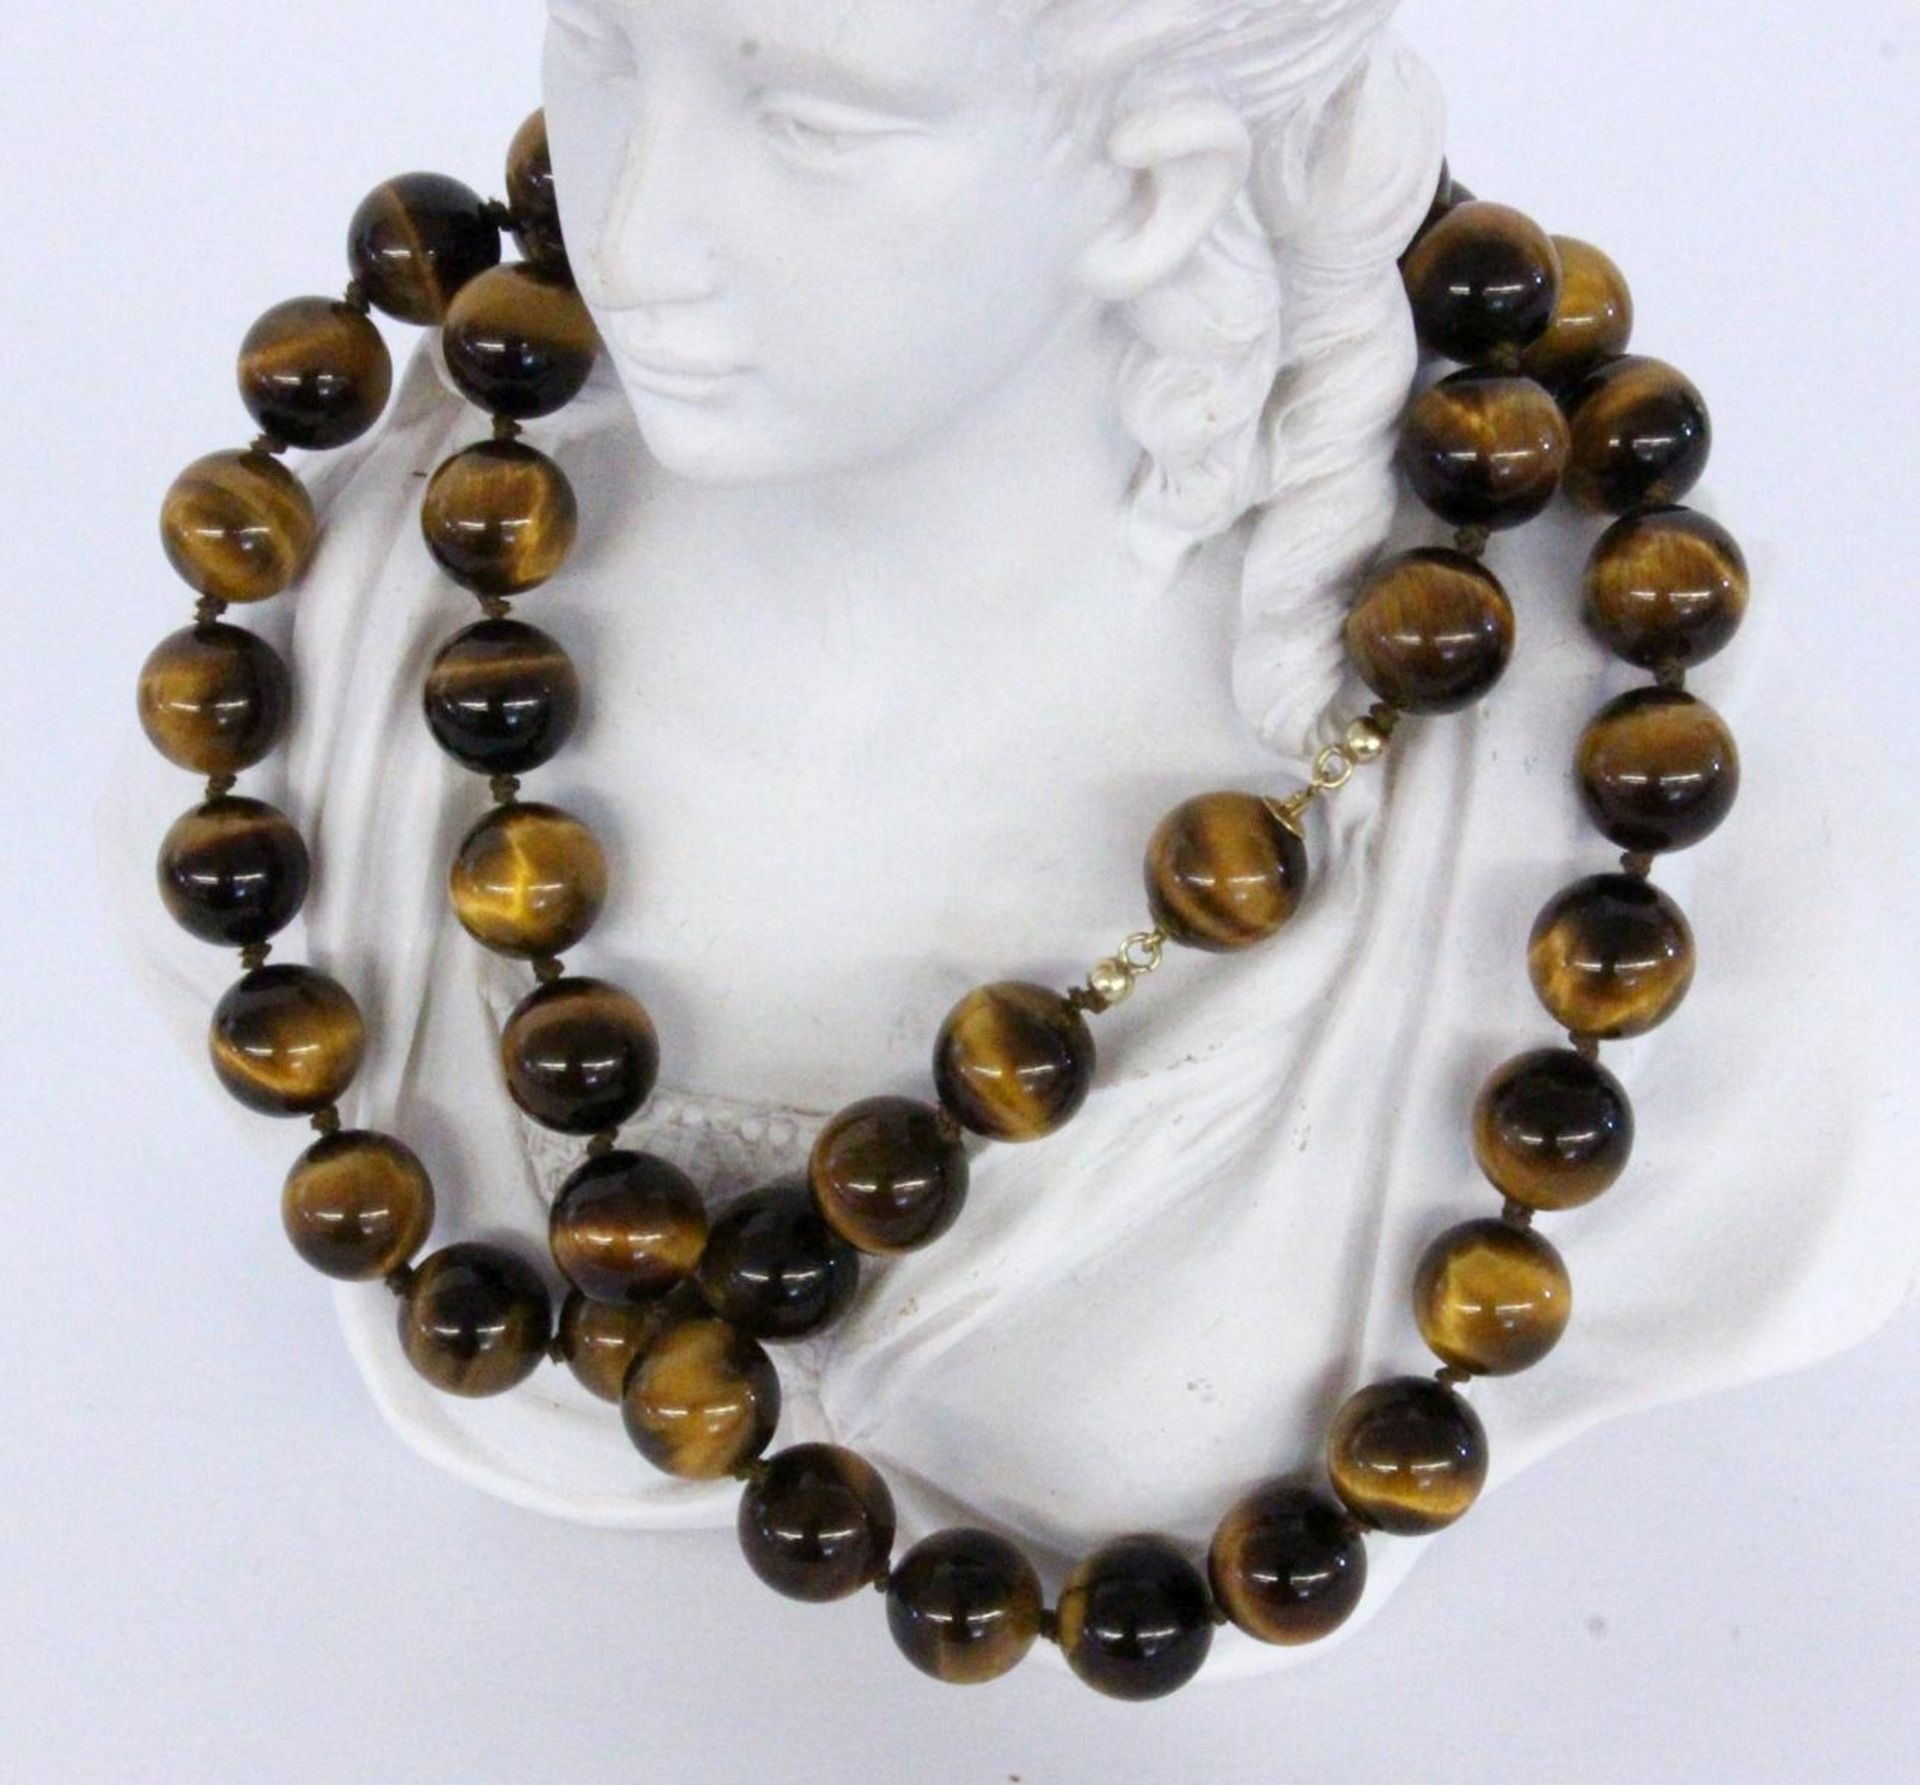 A NECKLACE WITH TIGER'S EYE BEADS Clasp 750/000 yellow gold. Diameter 12 mm, length 63.5